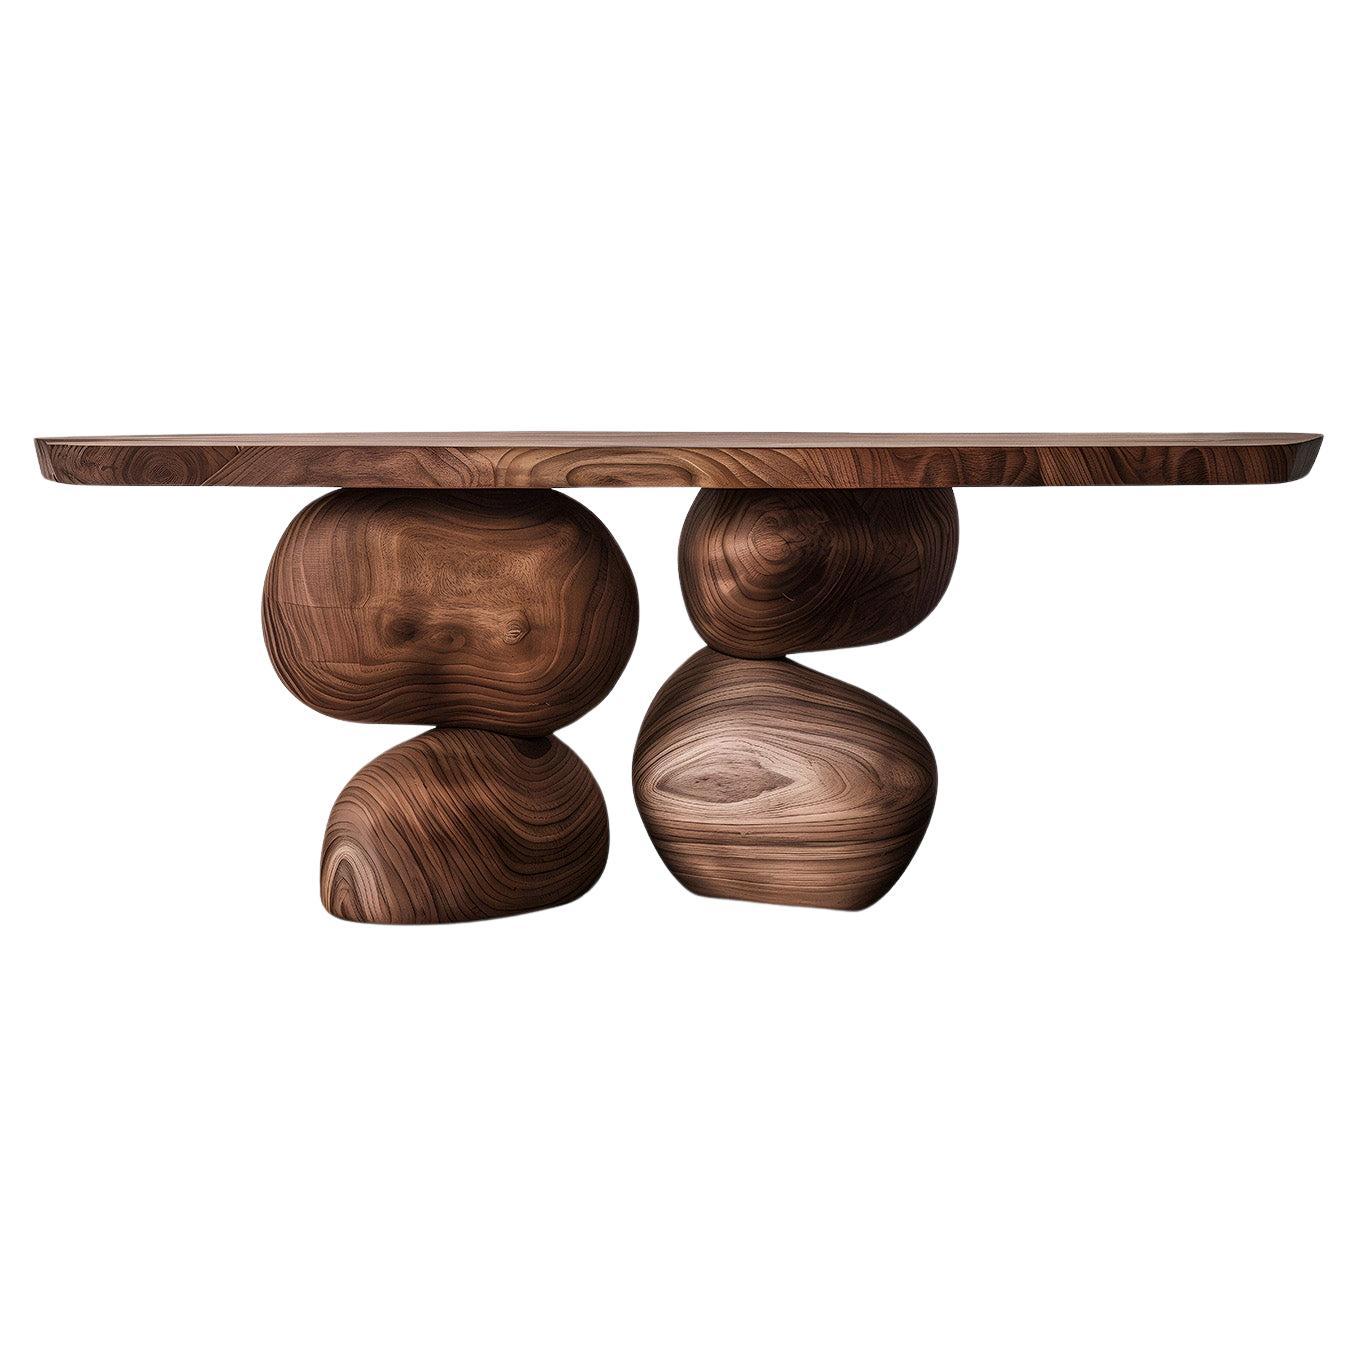 NONO Elefante Console Table 23, Flowing Lines, Solid Craft For Sale